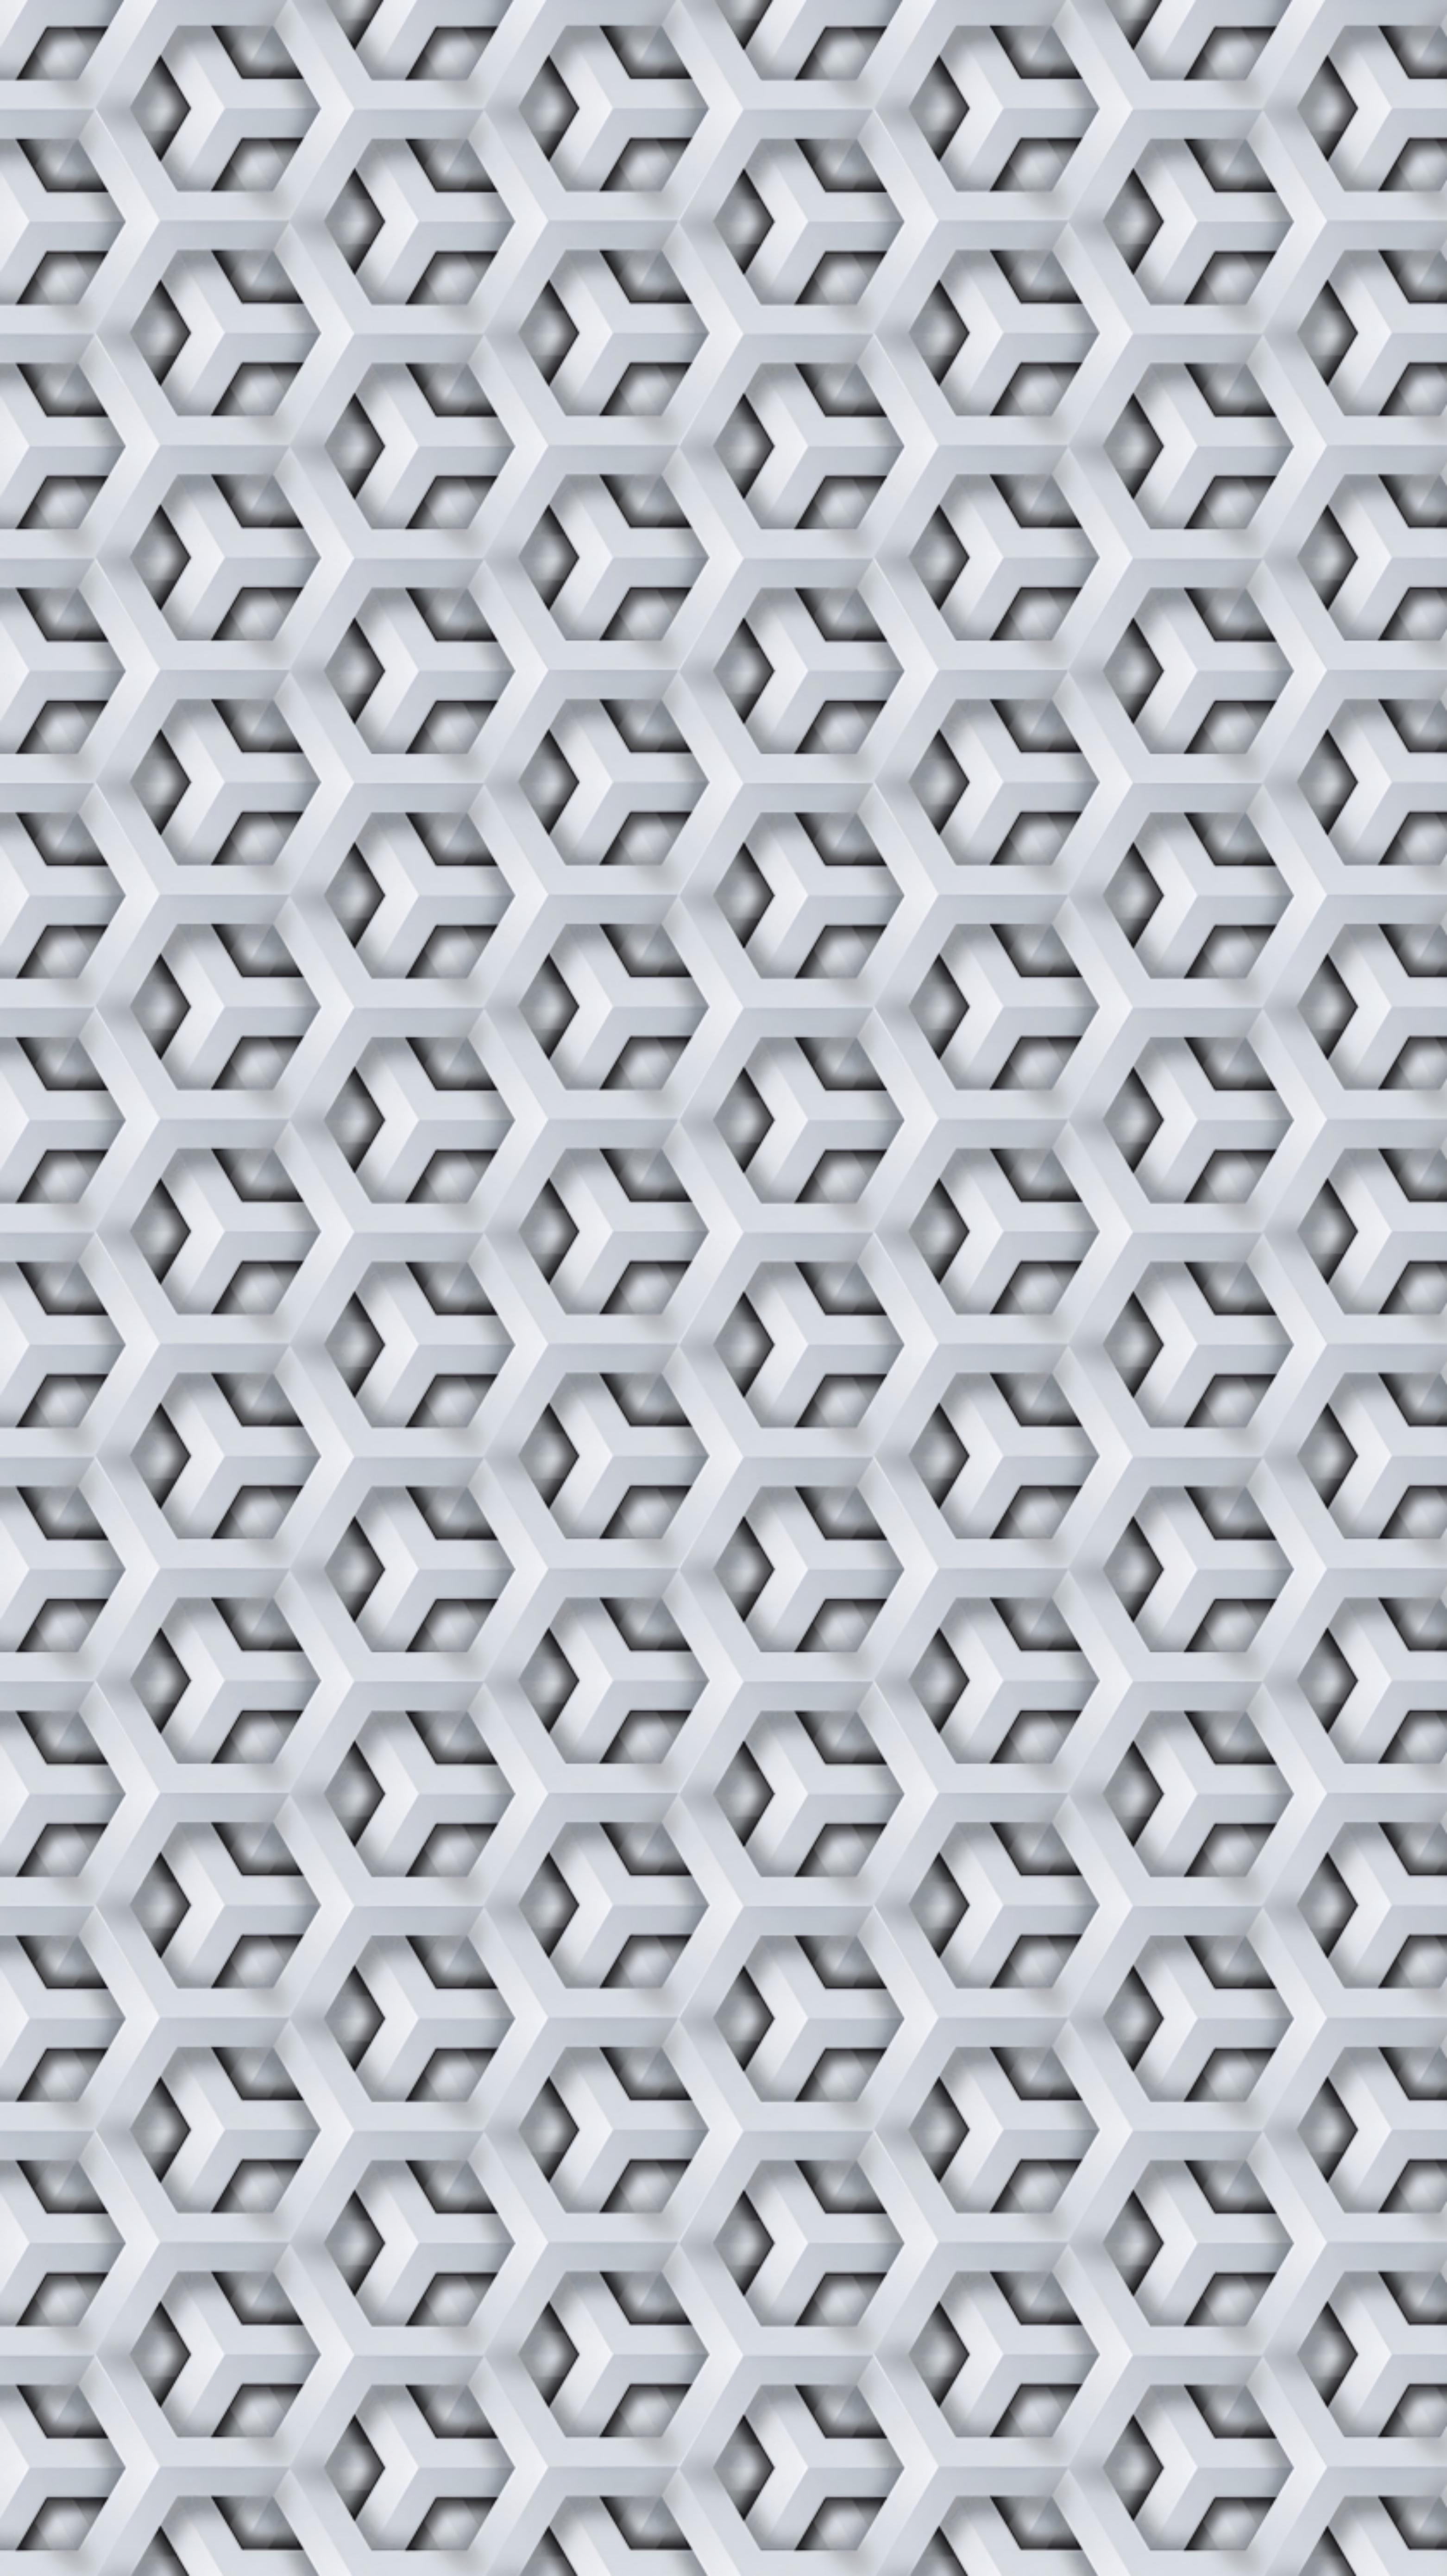 pattern, textures, white, texture, grid, pentagons lock screen backgrounds